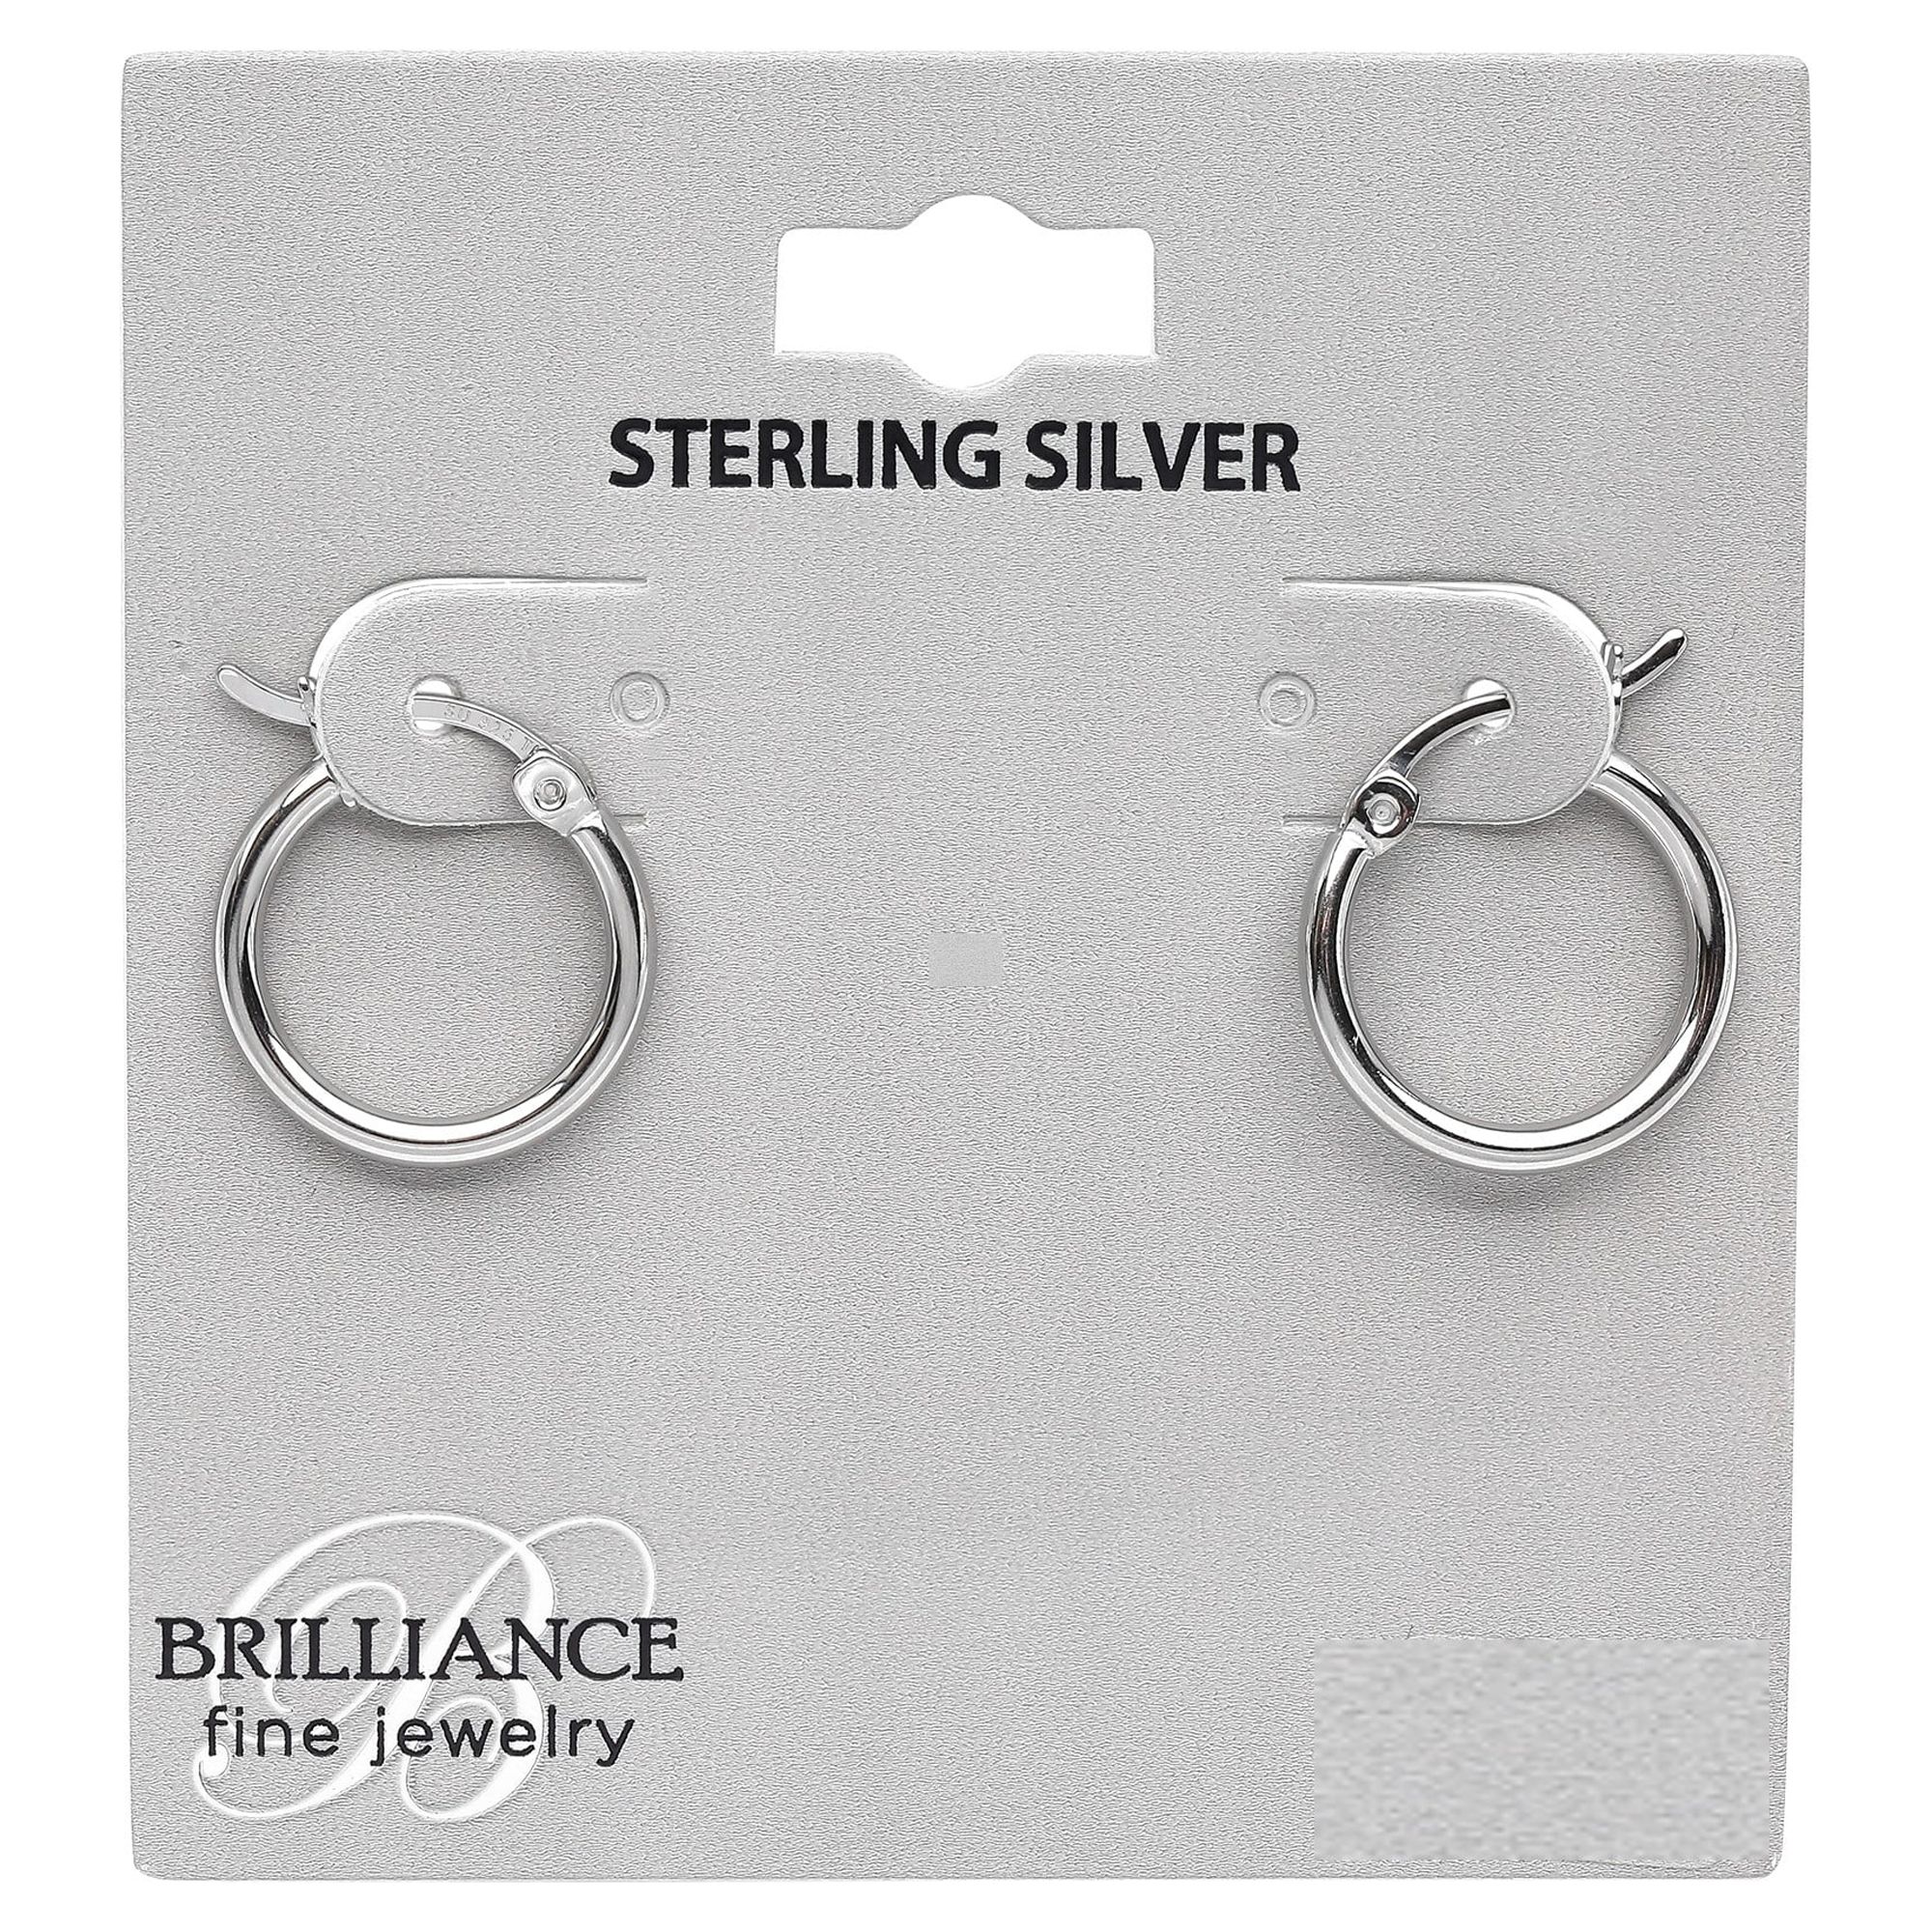 Brilliance Fine Jewelry Click Top Hoop Earrings in Sterling Silver 15MM - image 3 of 5